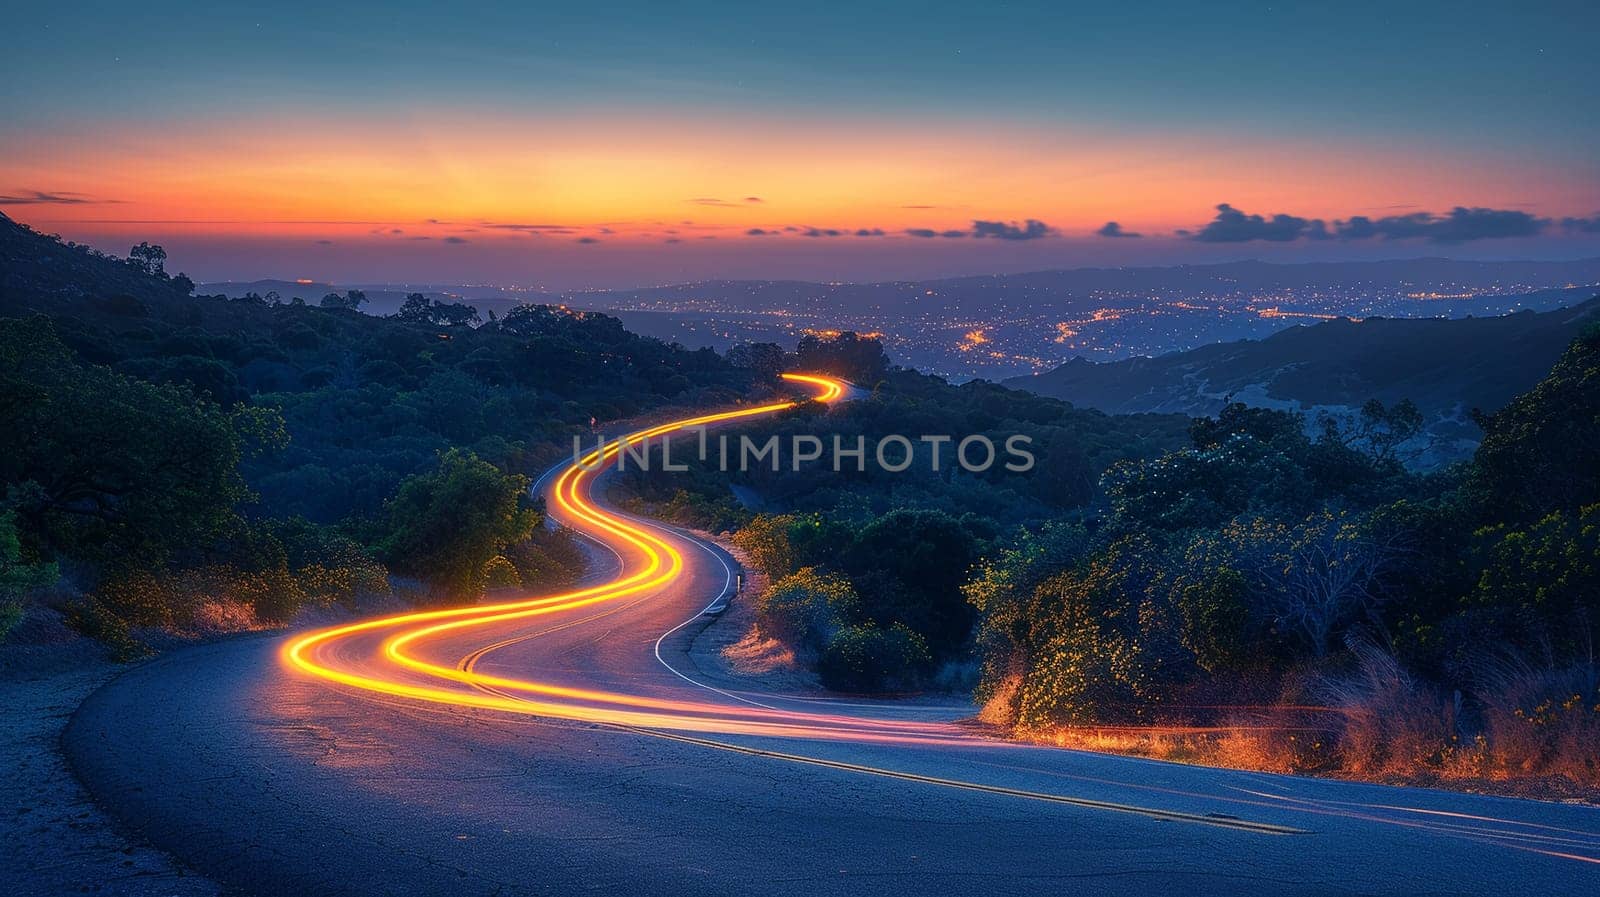 Light trails on mountain road at night, illustrating motion and journey.